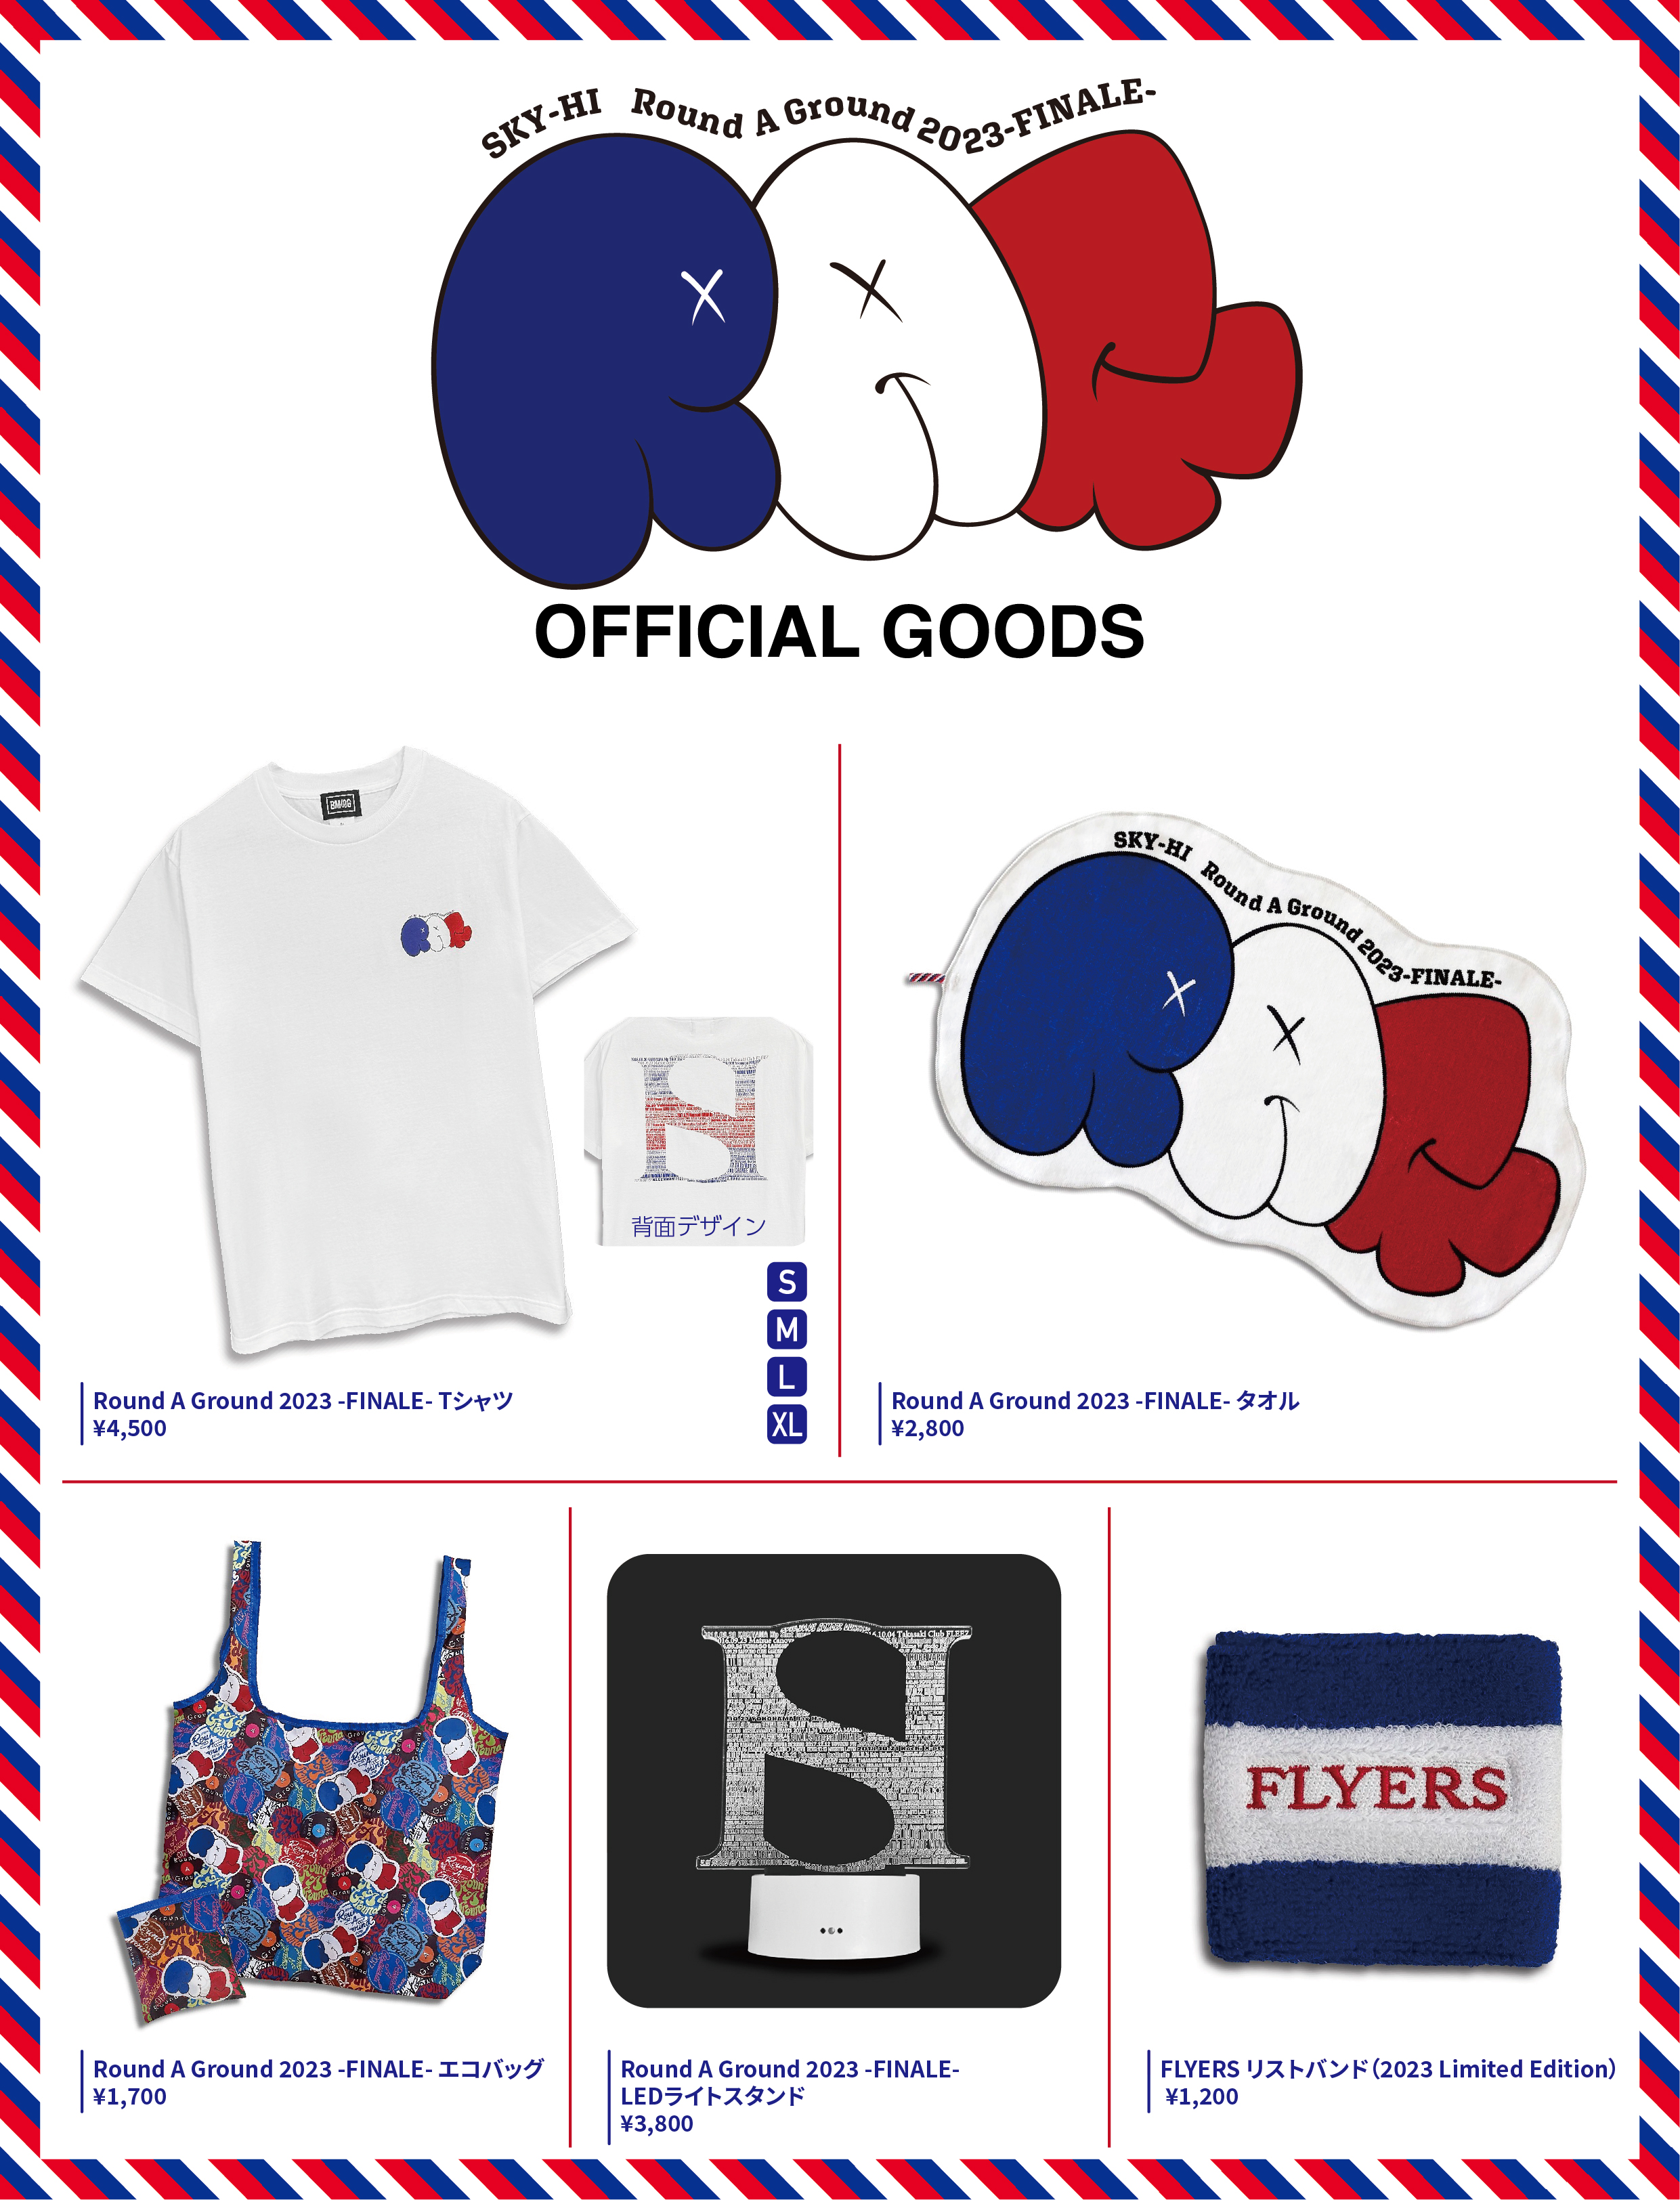 SKY-HI Round A Ground 2023 -FINALE-』OFFICIAL GOODS 販売のお知らせ ...